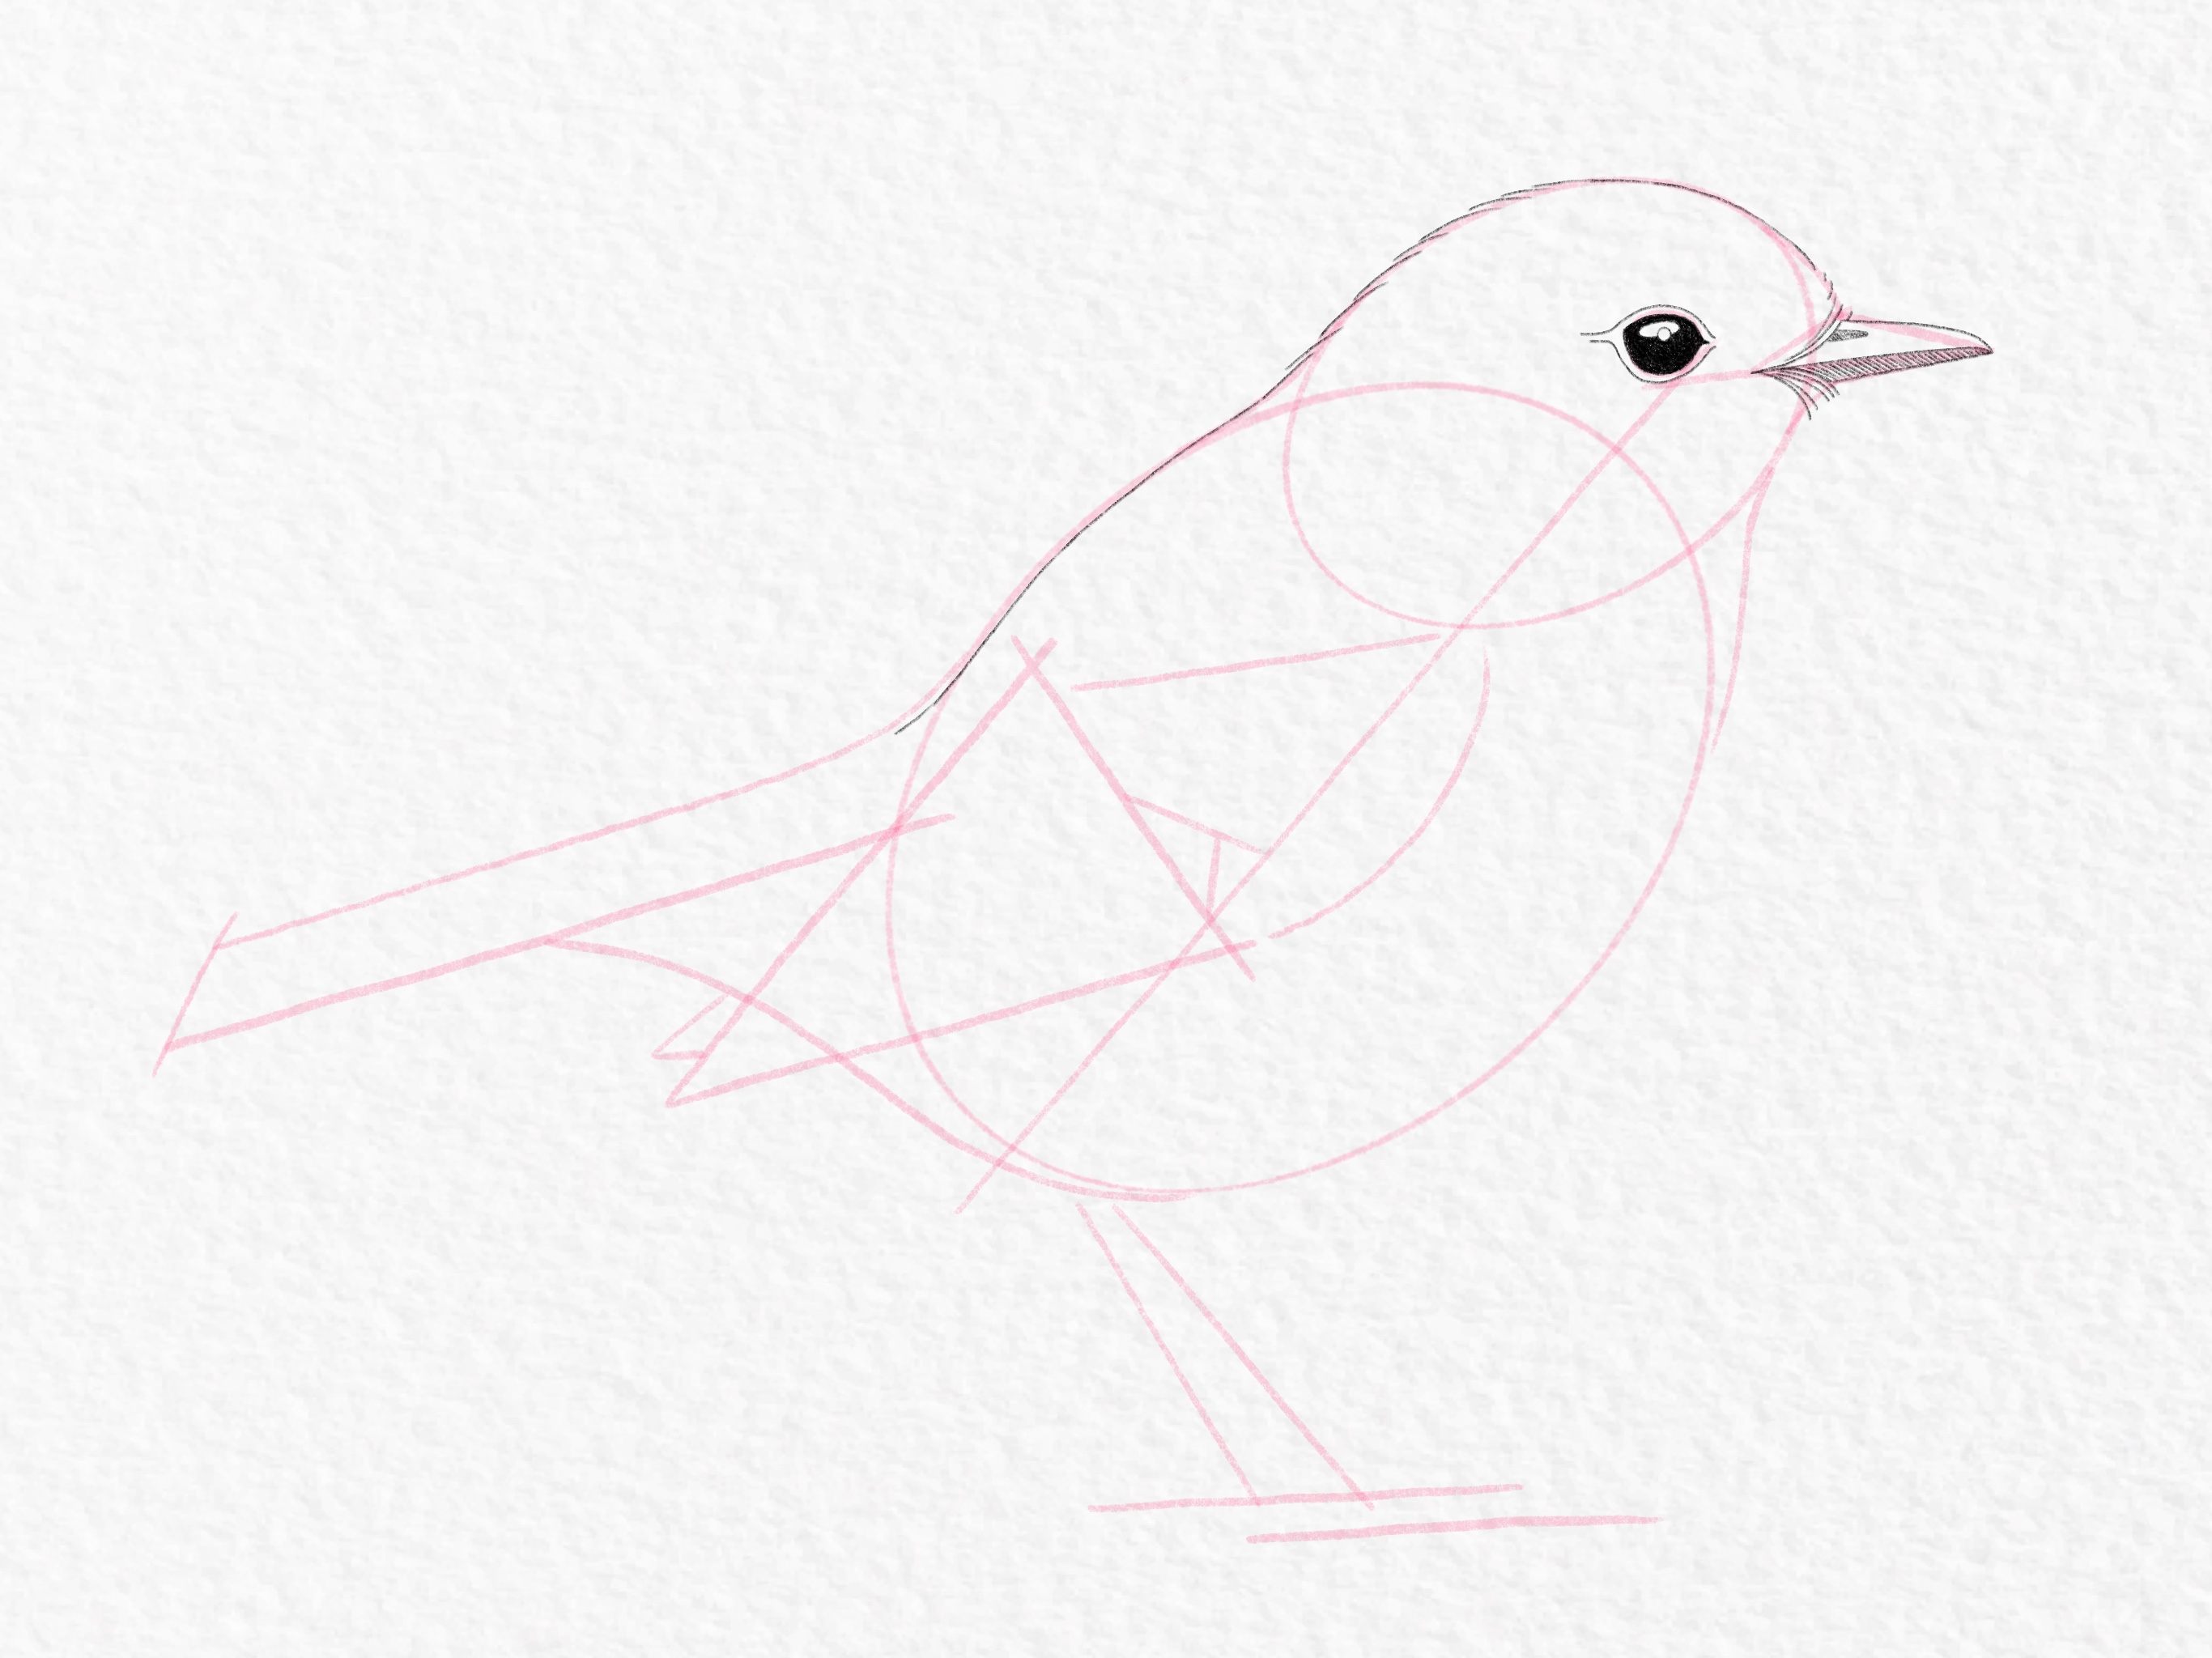 How to draw a bird – Step 9